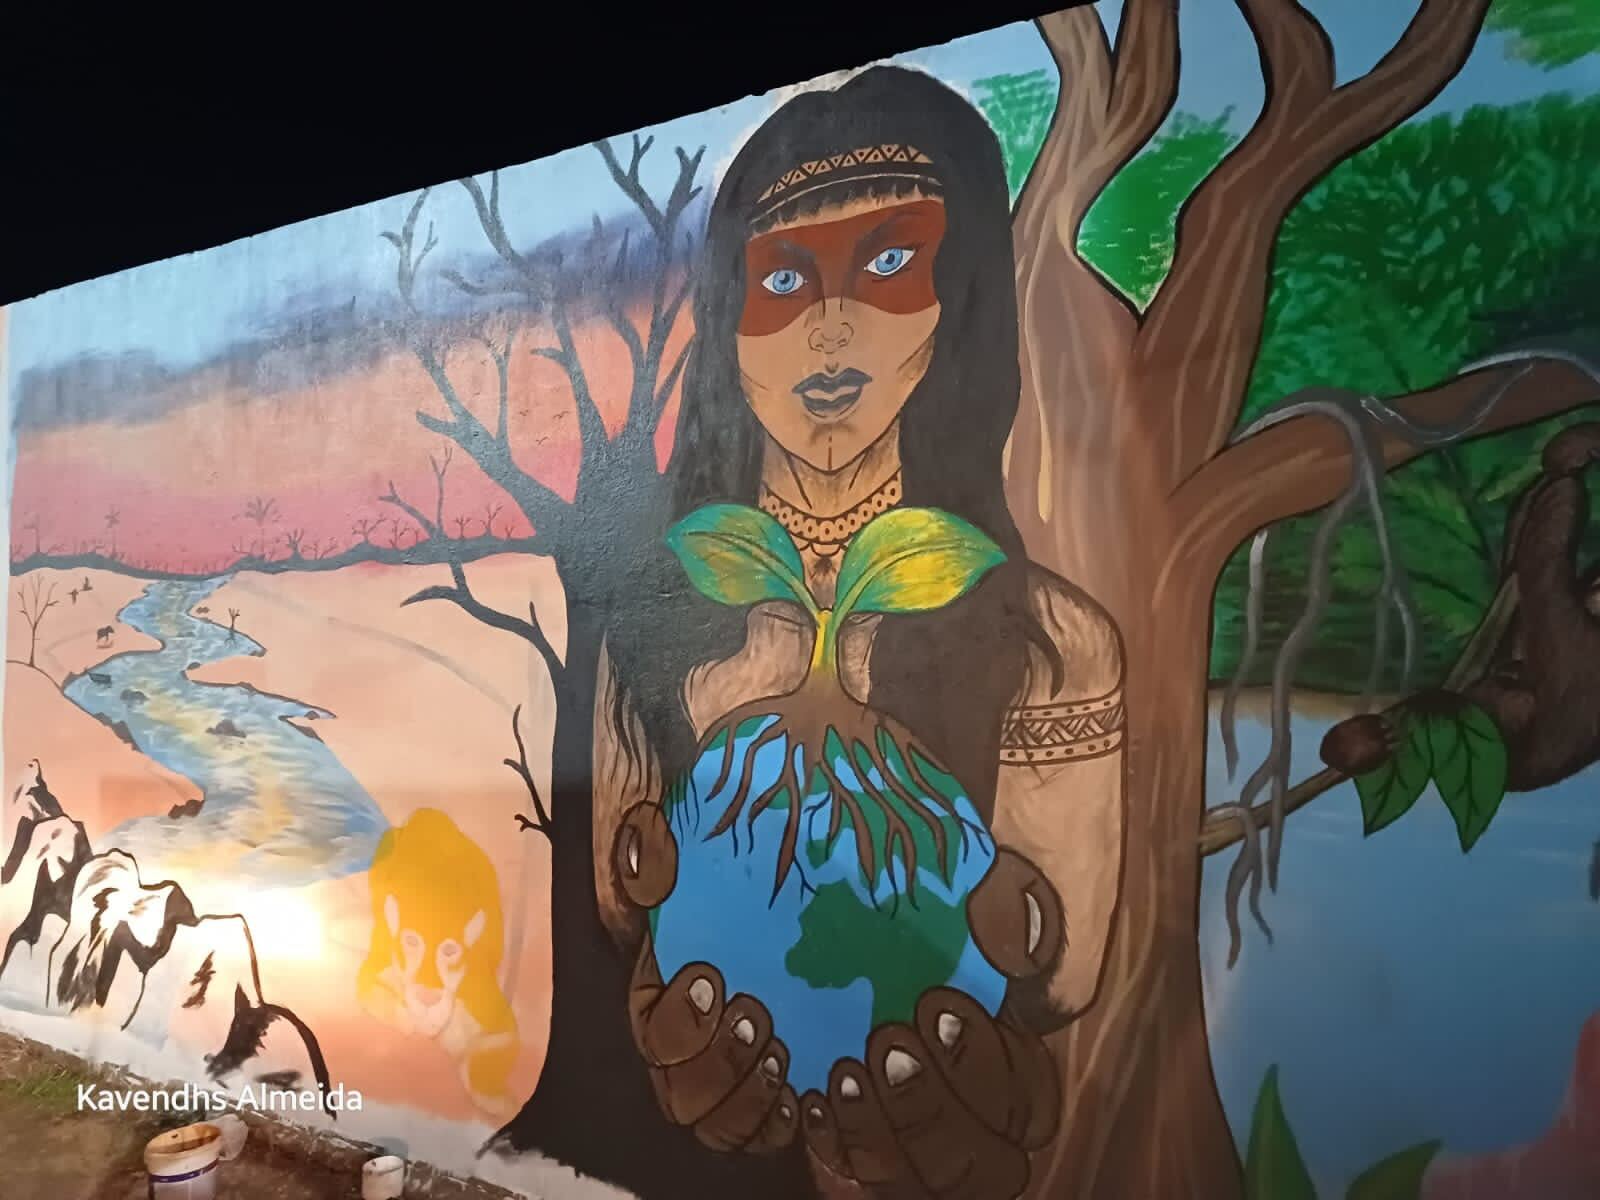 Silves, Brazil, October 26: as preparation for Power Up, local communities painted murals and planted trees in Silves, in preparation for their Power Up actions. They are fighting against fossil gas in the Amazon. Photo credit: Kavendhs Almeida